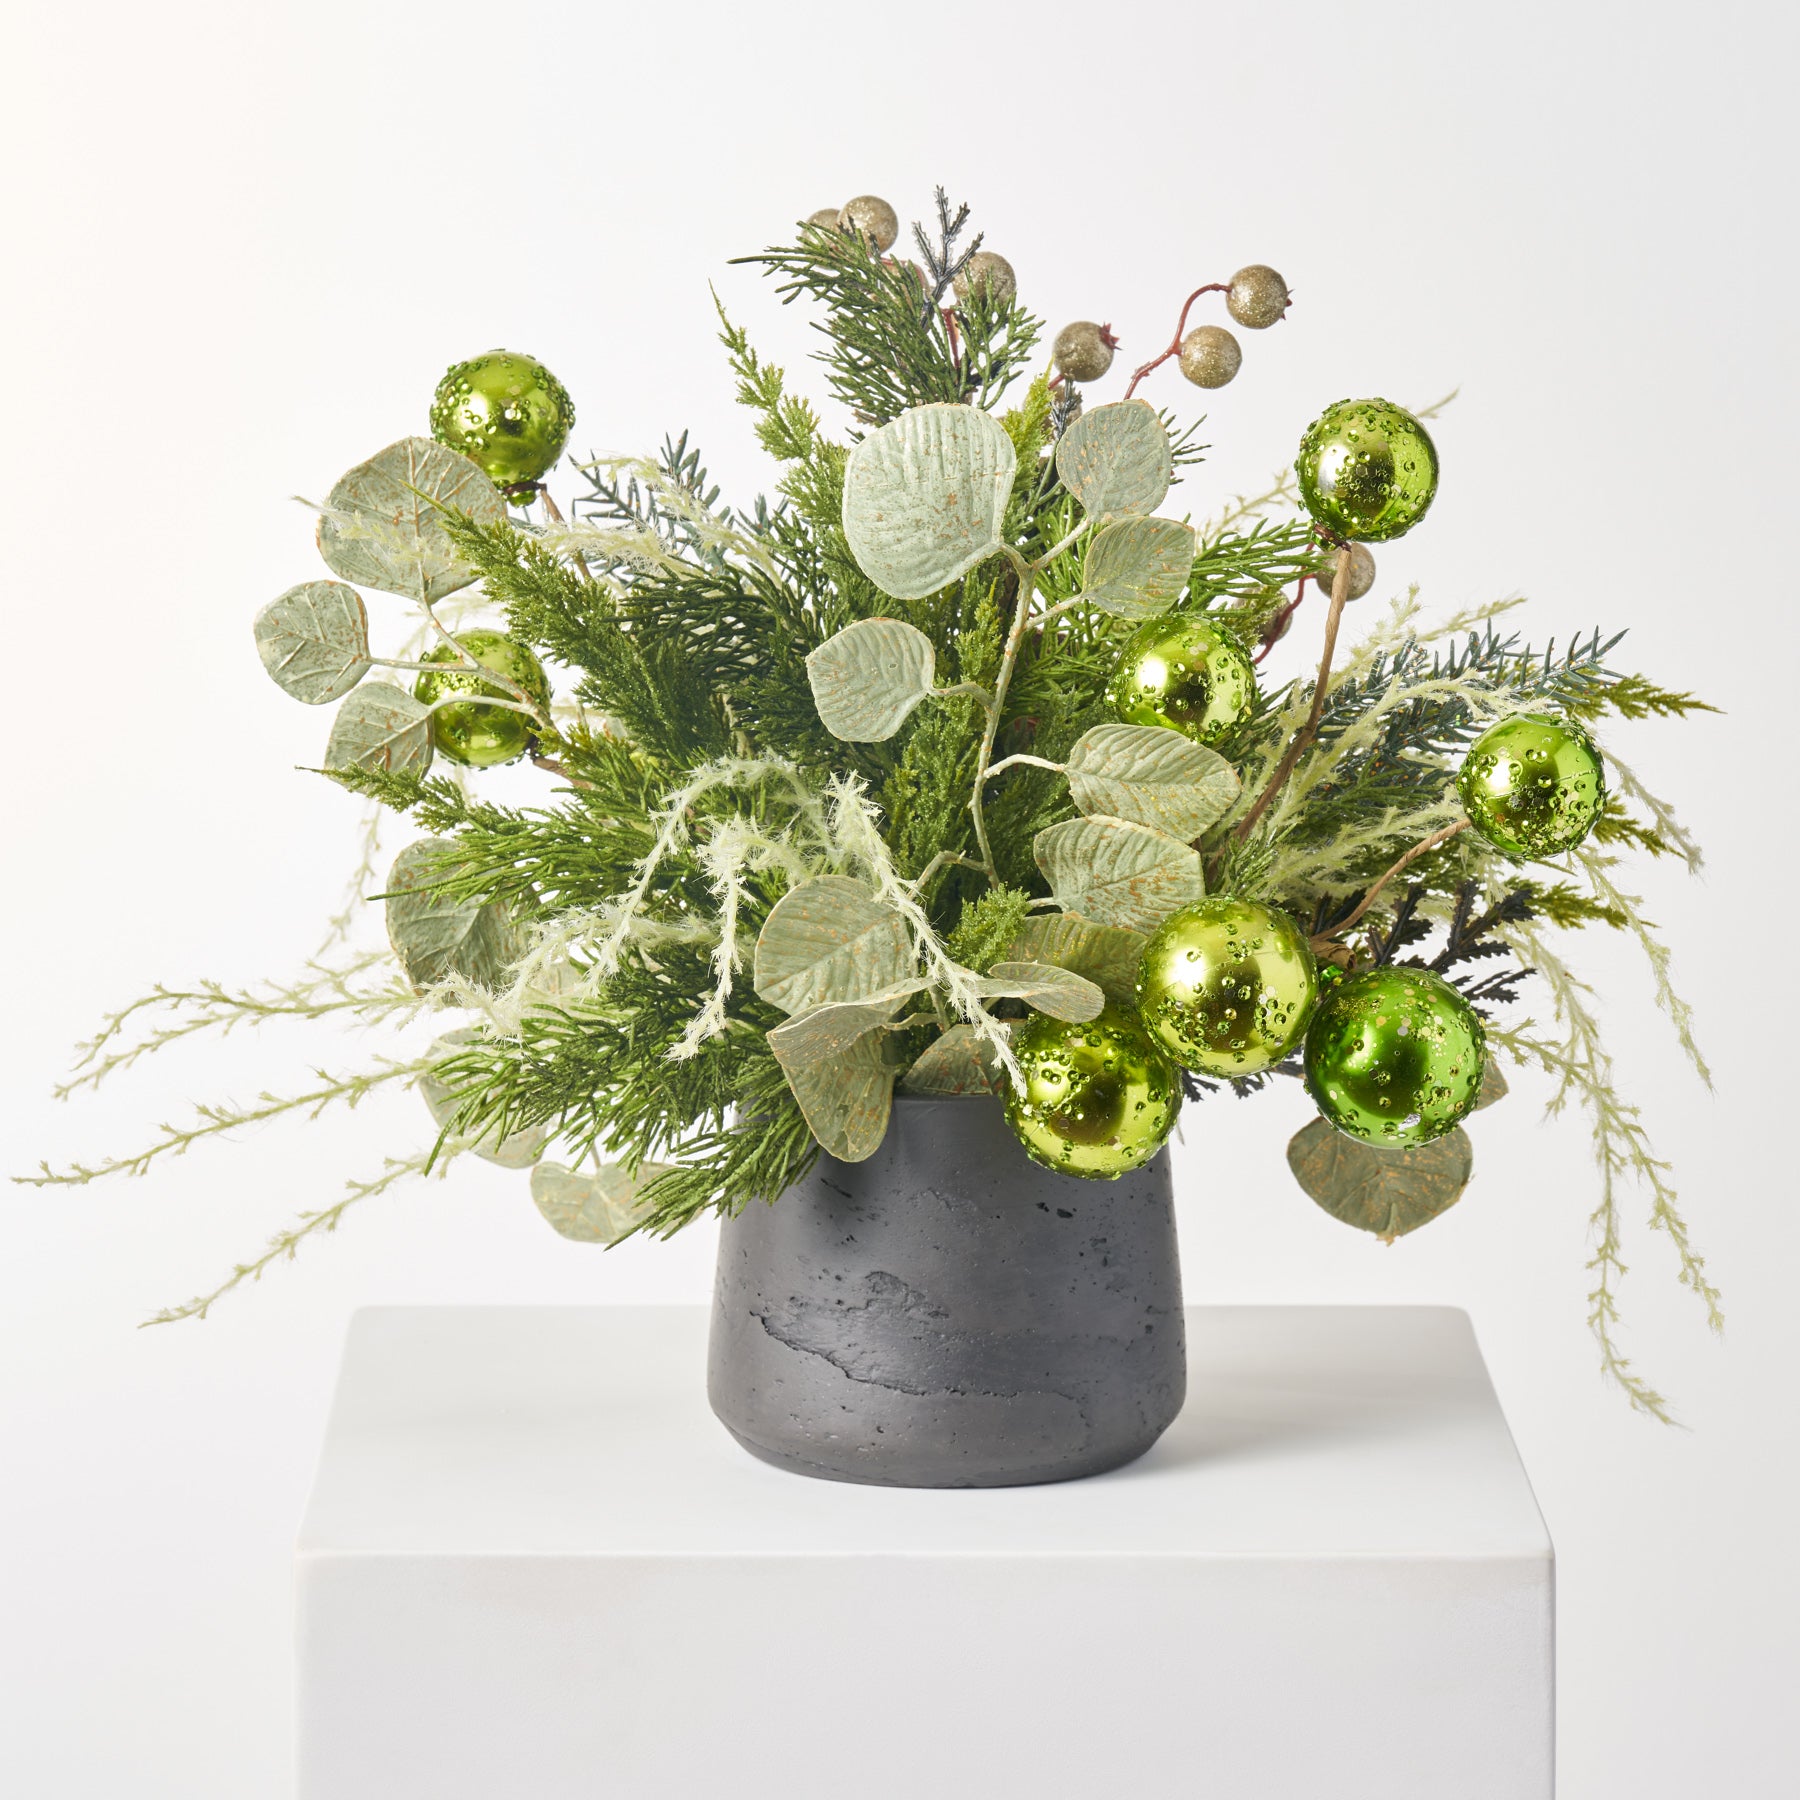 Mixed Winter Greenery & Pinecone Rustic Arrangement in White Birch Cyl –  Darby Creek Trading